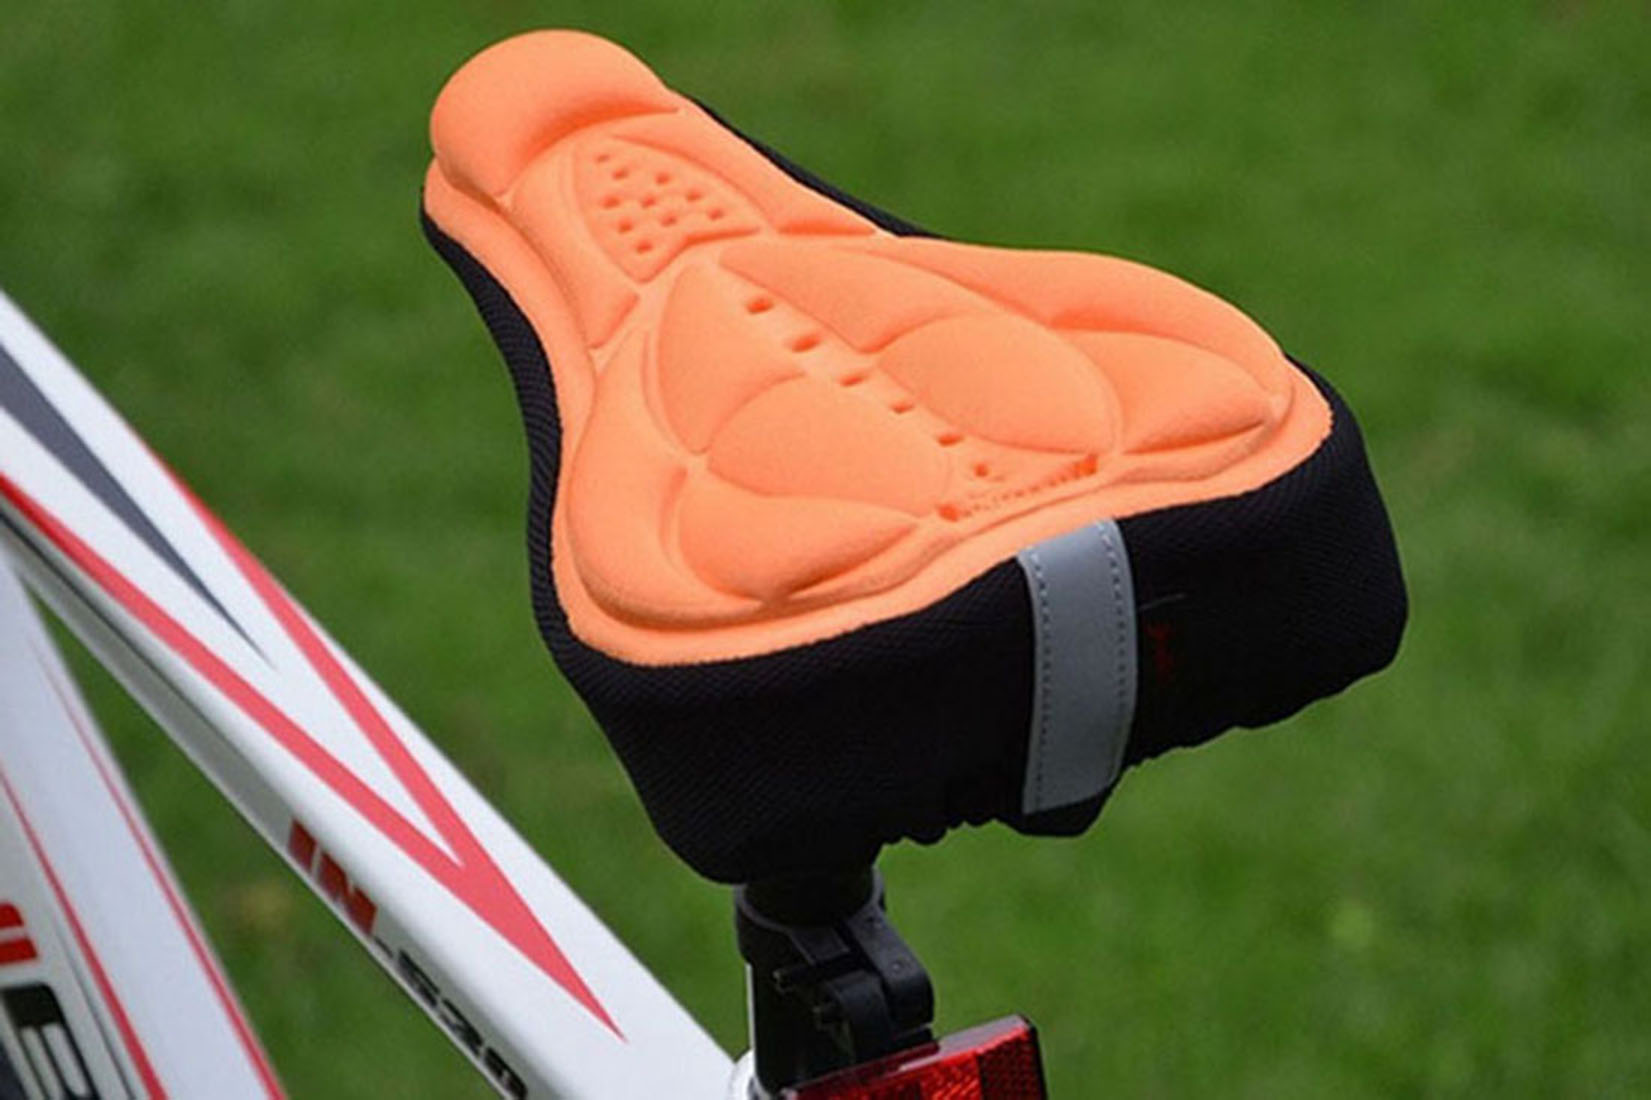 New Cycling Bicycle Bike Gel Pad Seat Saddle Cover Soft Cushion Unique Sports